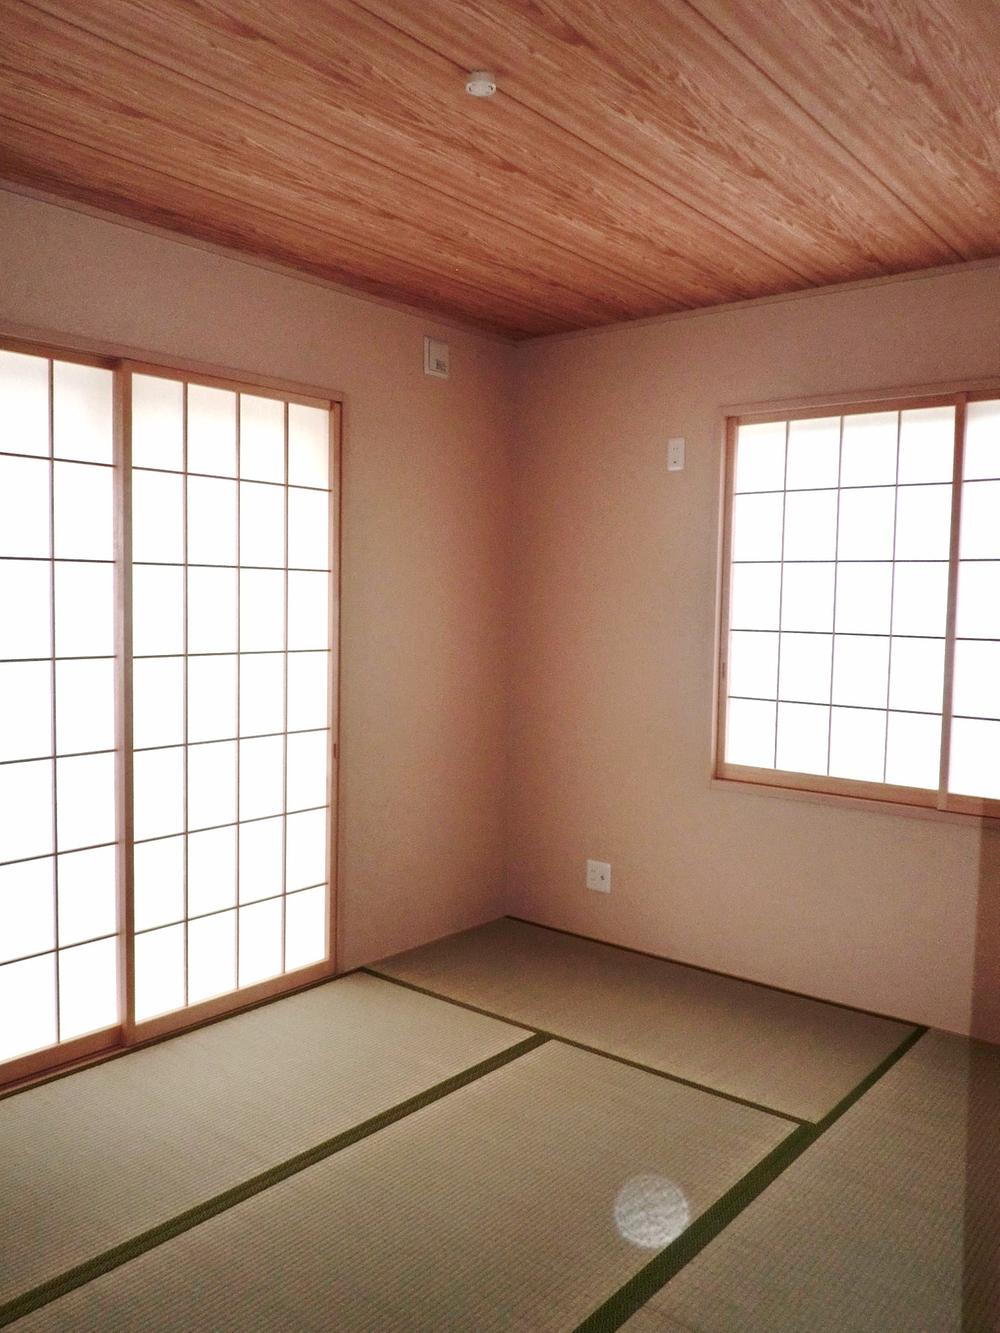 Non-living room. Since the Japanese-style room, which is independent across the hallway from the living room, It can also be used as a guest room